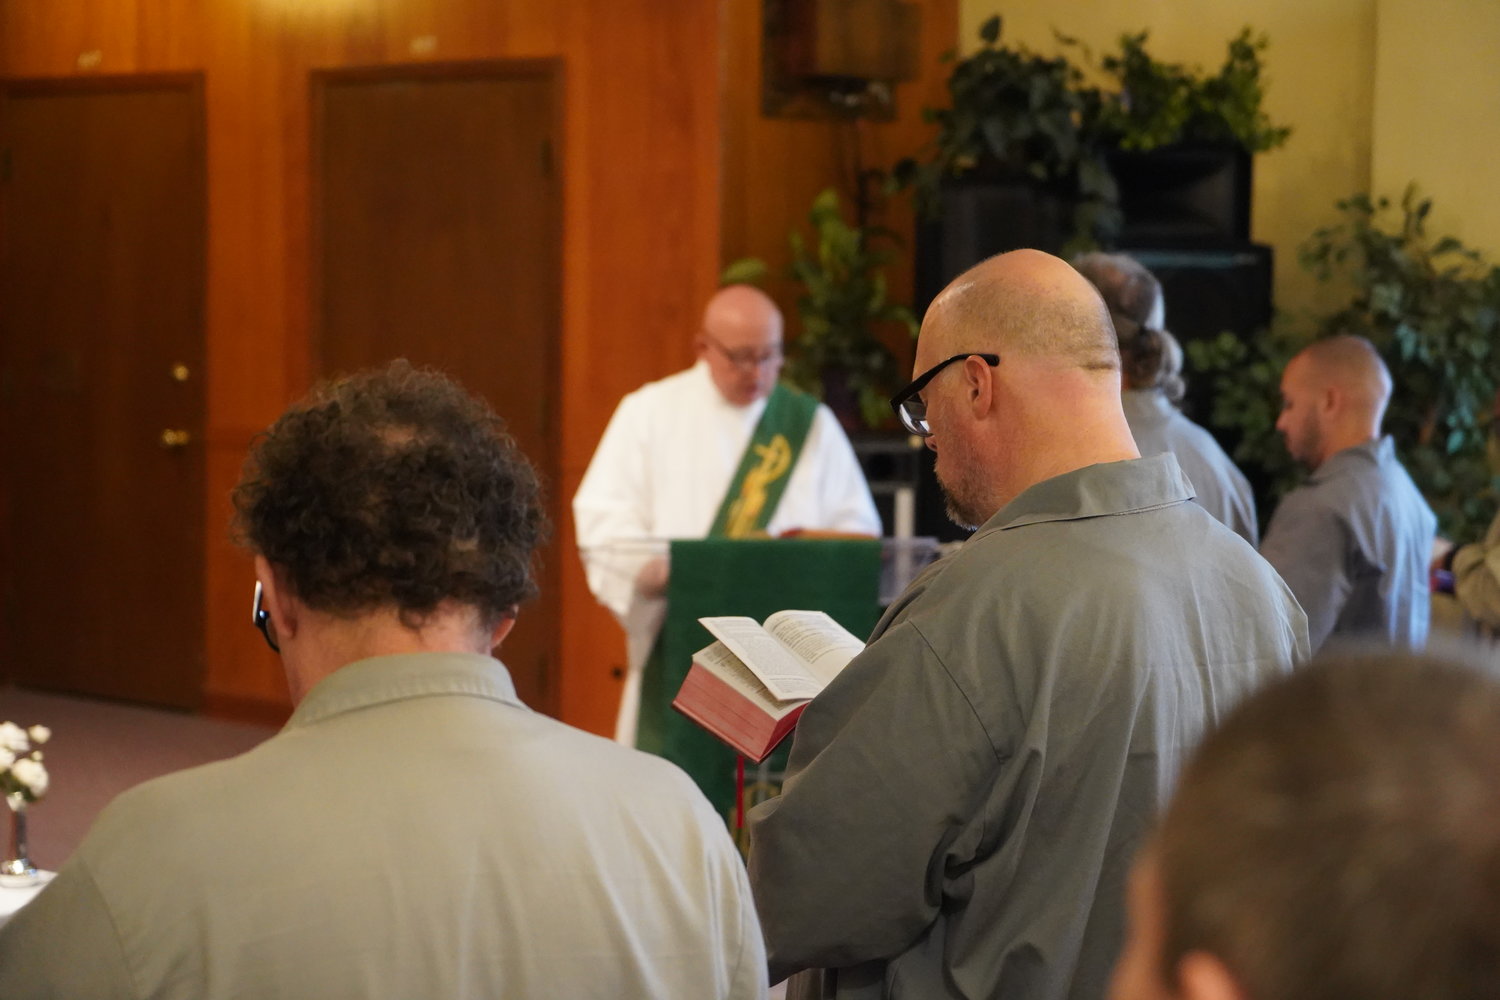 A resident of the Algoa Correctional Center in Jefferson City follows along in a Missal during a Nov. 6 Mass offered by Bishop W. Shawn McKnight and Father Michael Penn in the prison chapel.